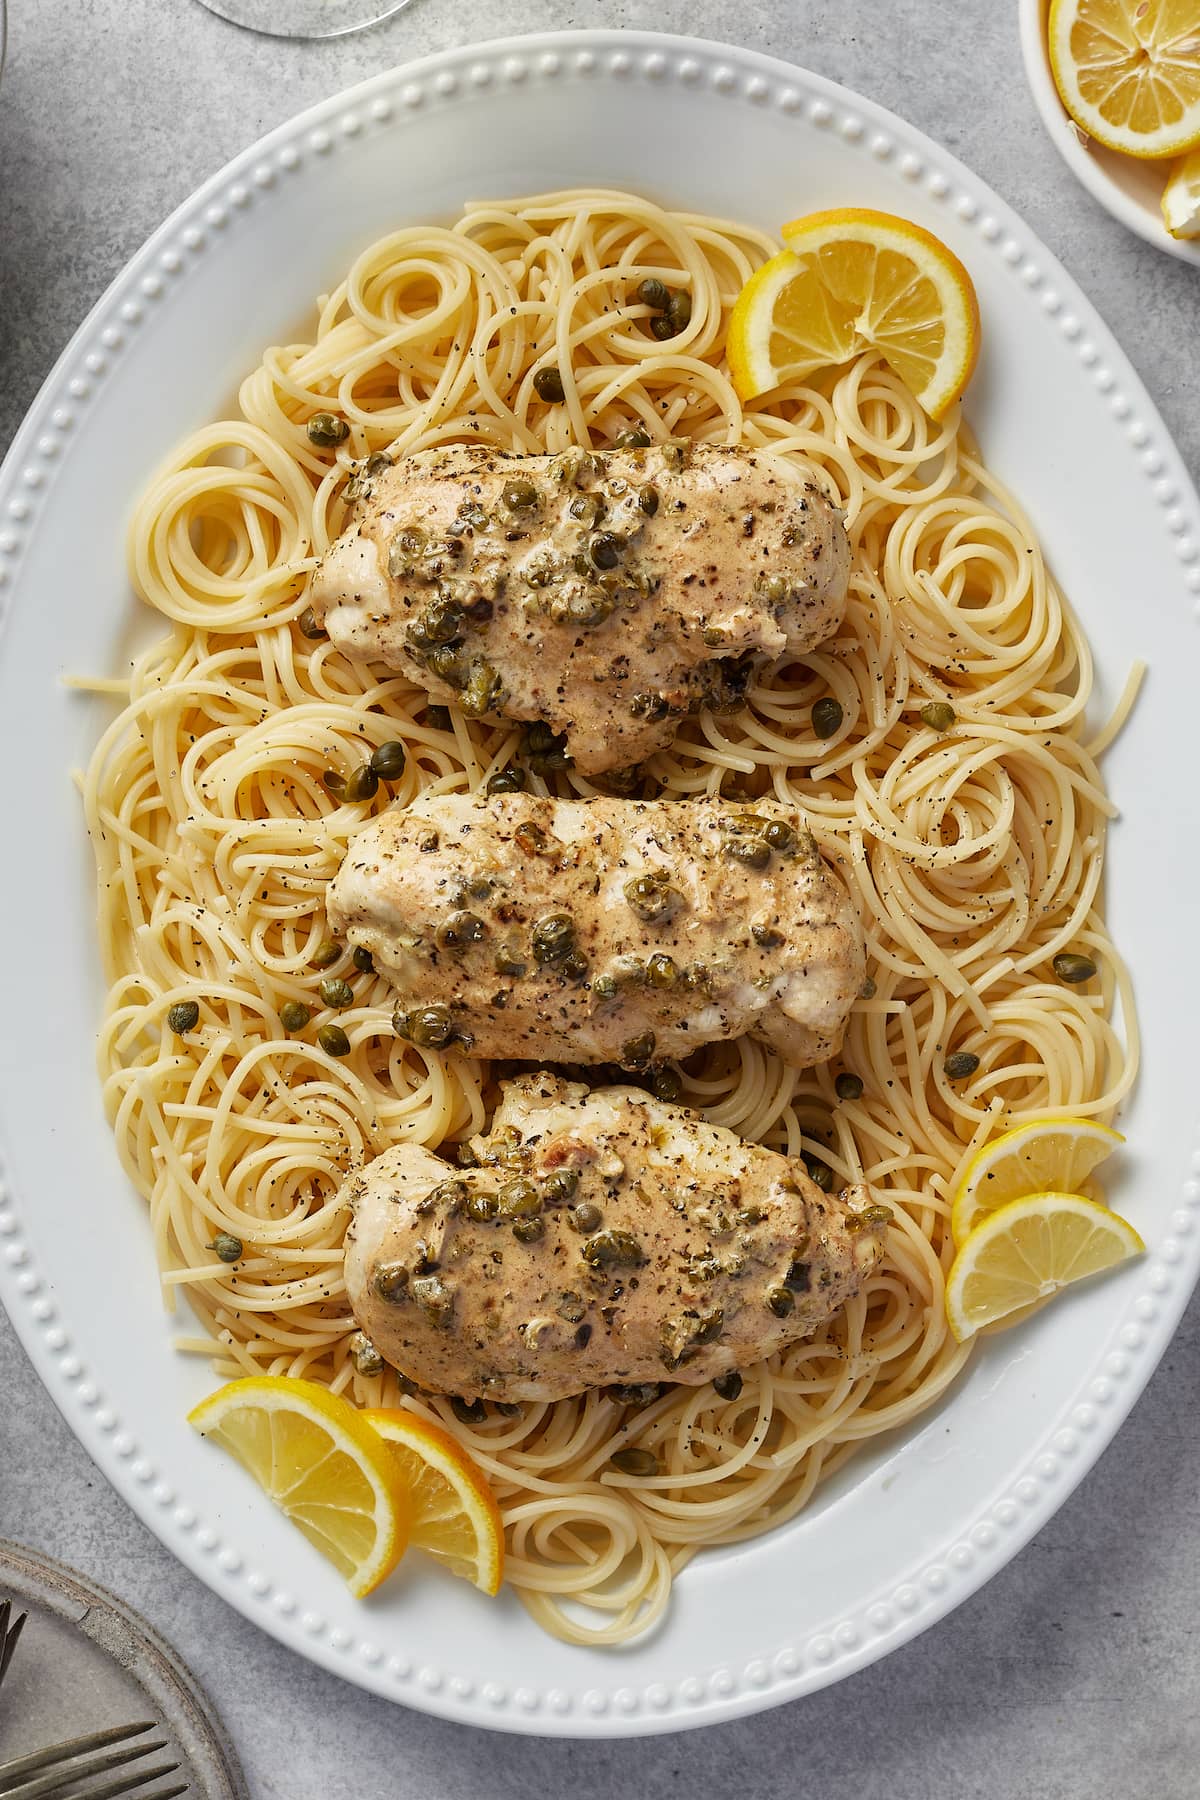 Chicken piccata pieces in lemon sauce served over a bed of spaghetti pasta.